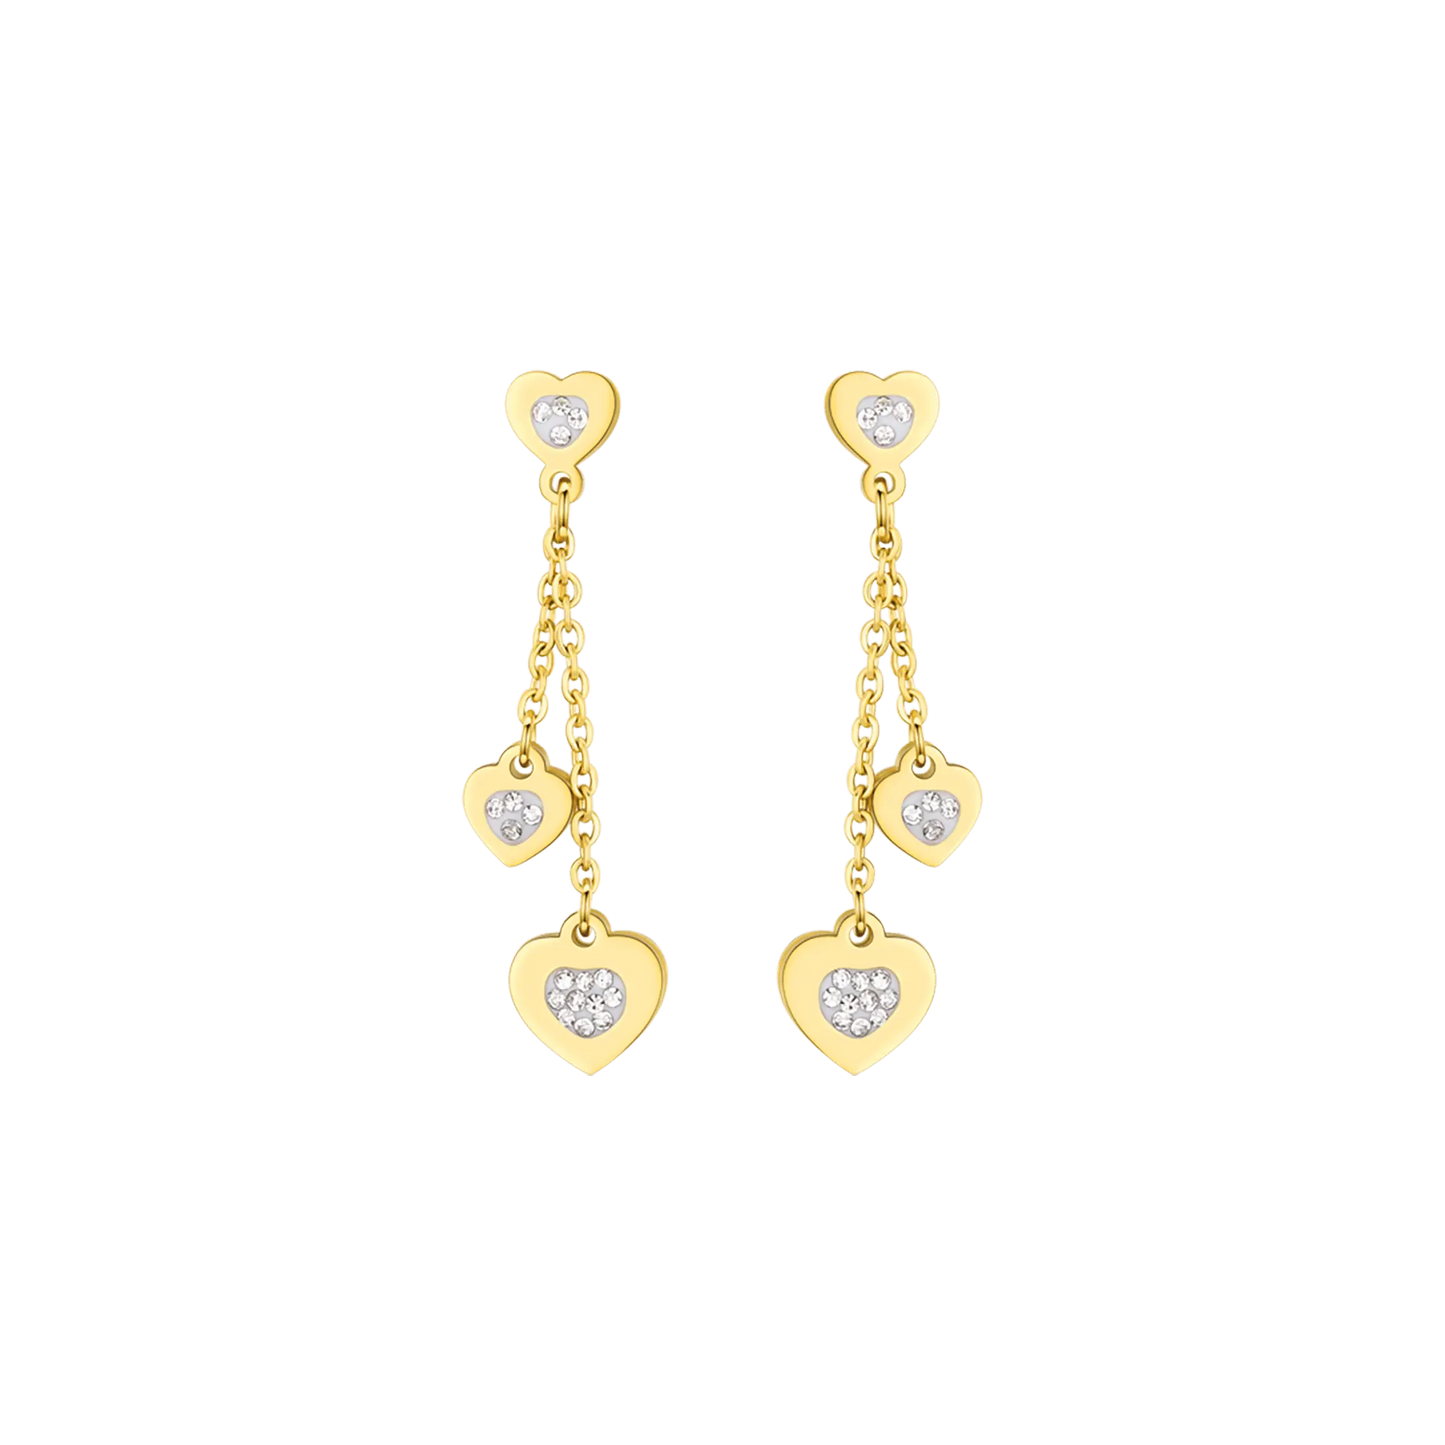 WOMAN'S EARRINGS IN IP GOLD STEEL WITH HEARTS AND WHITE CRYSTALS Luca Barra